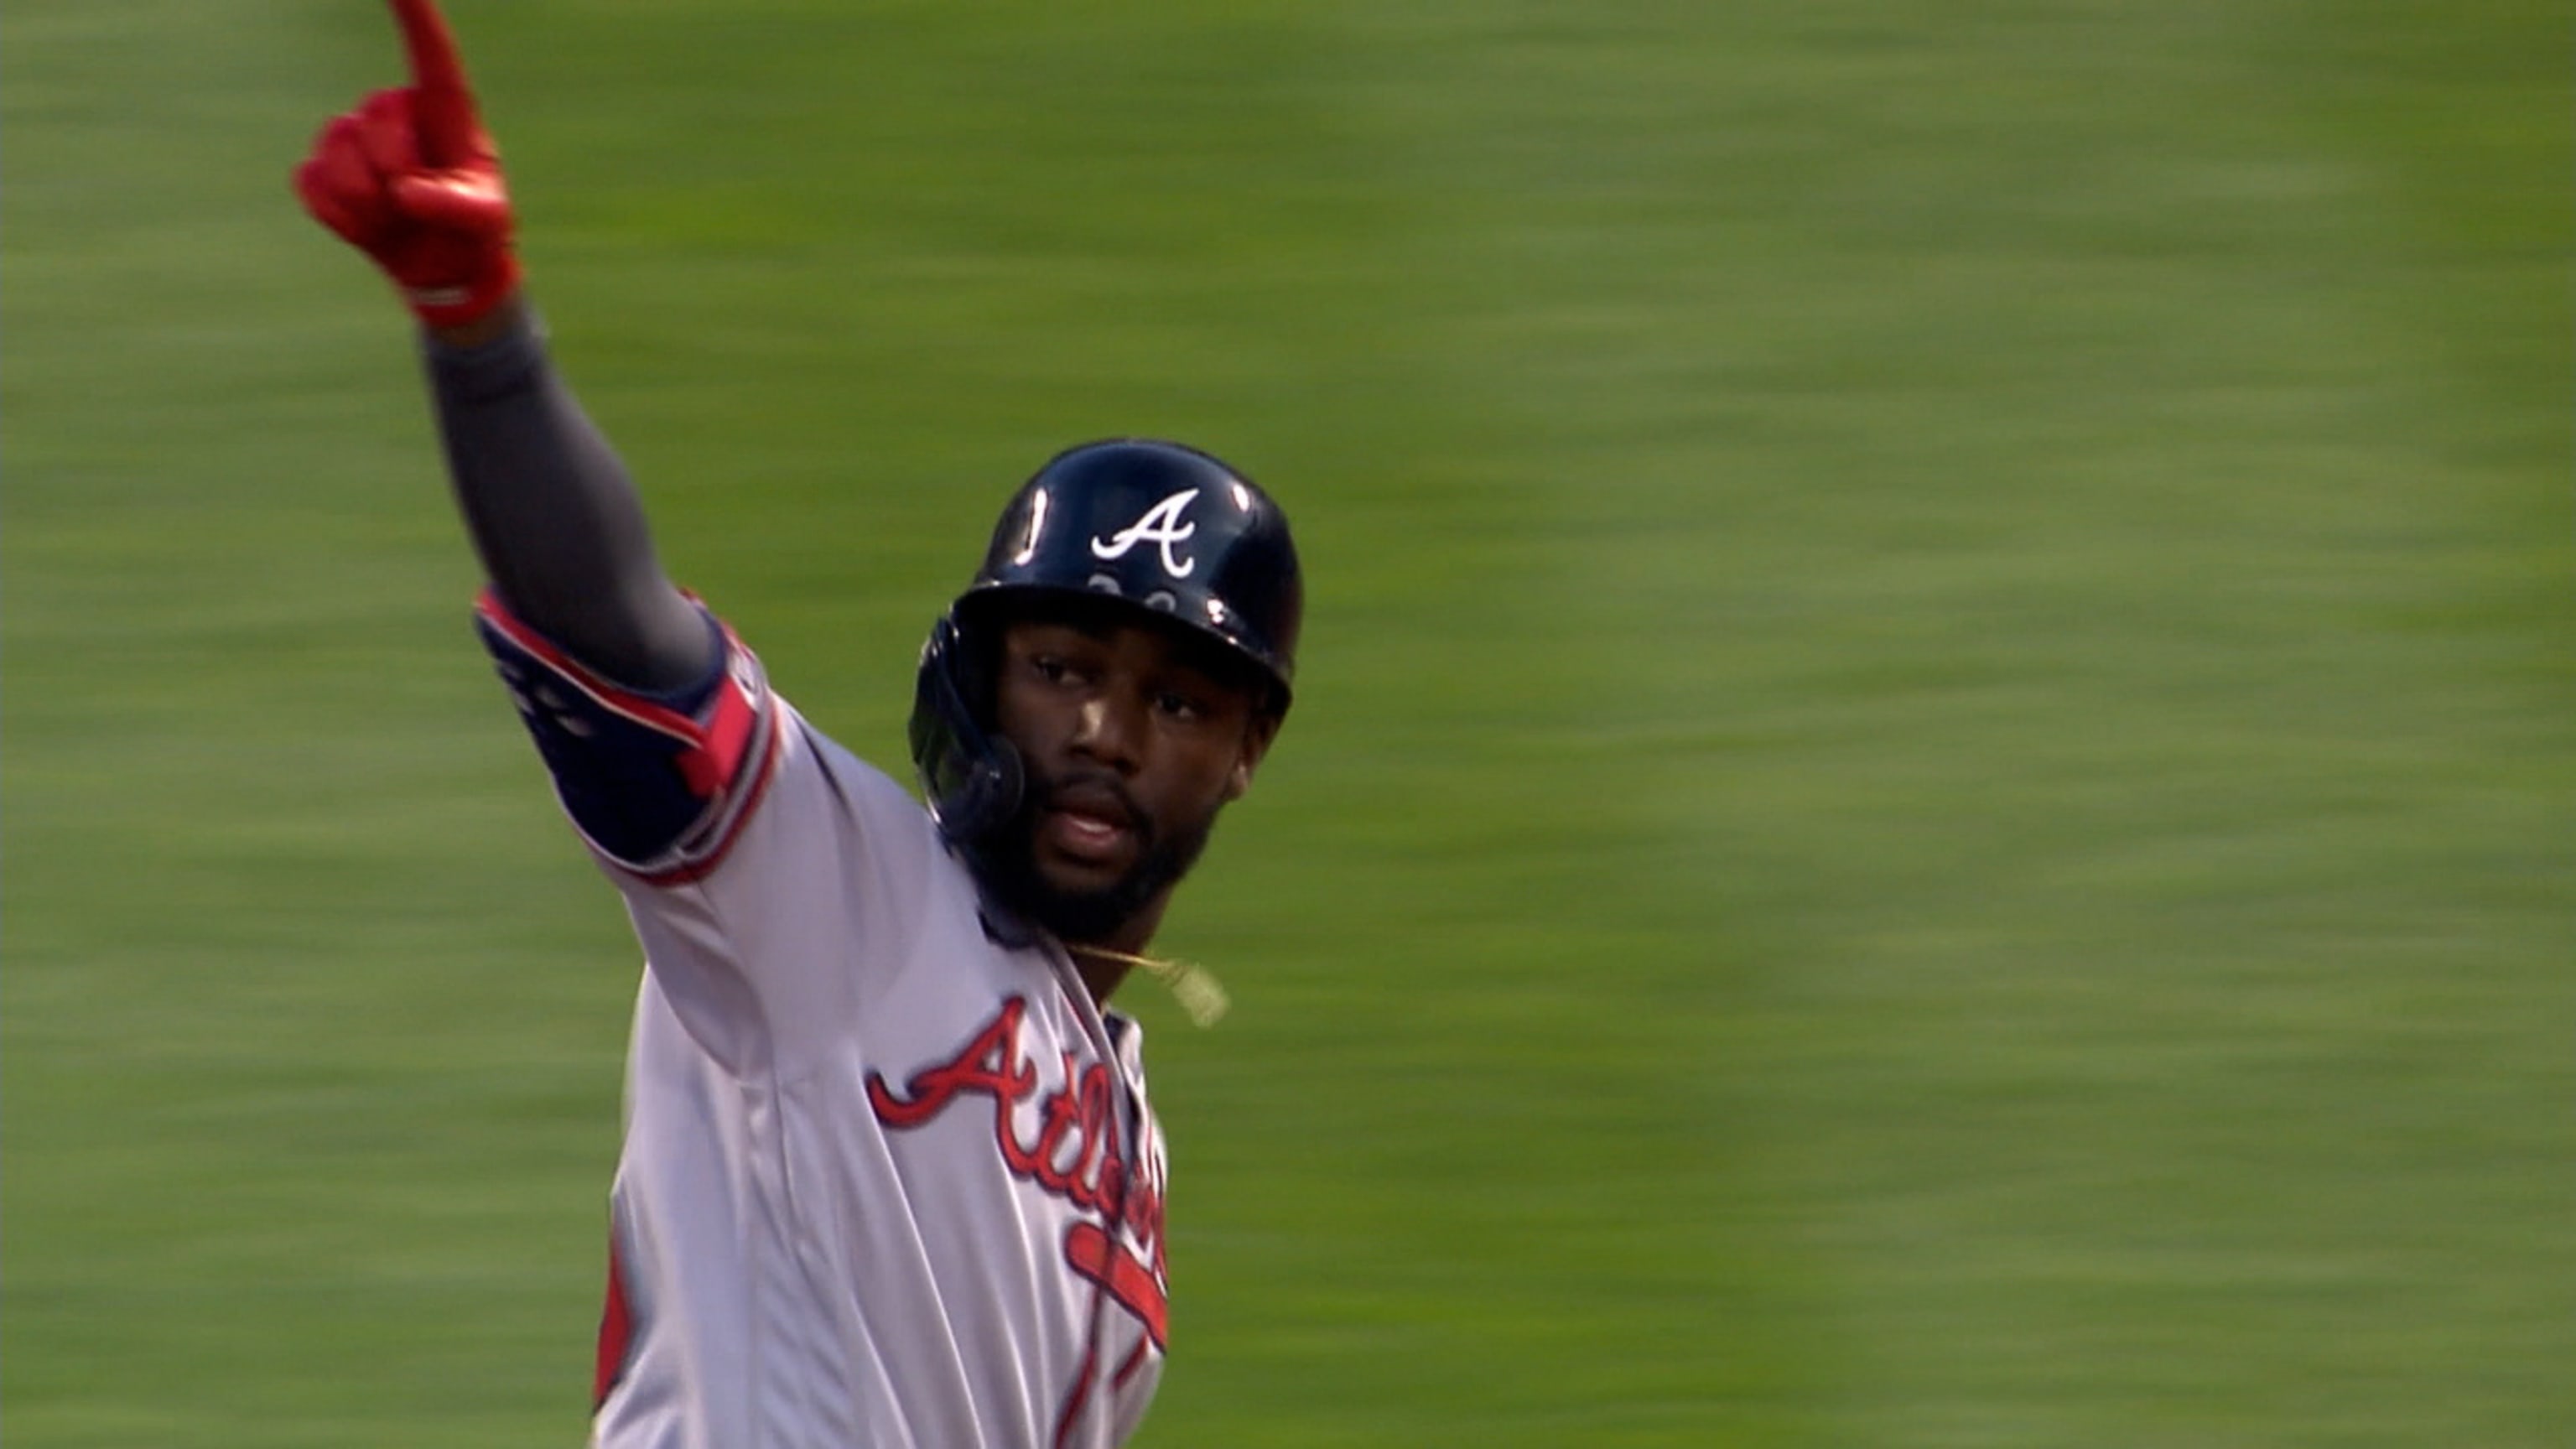 FOX Sports South broadcaster says Atlanta Braves outfielder Ronald